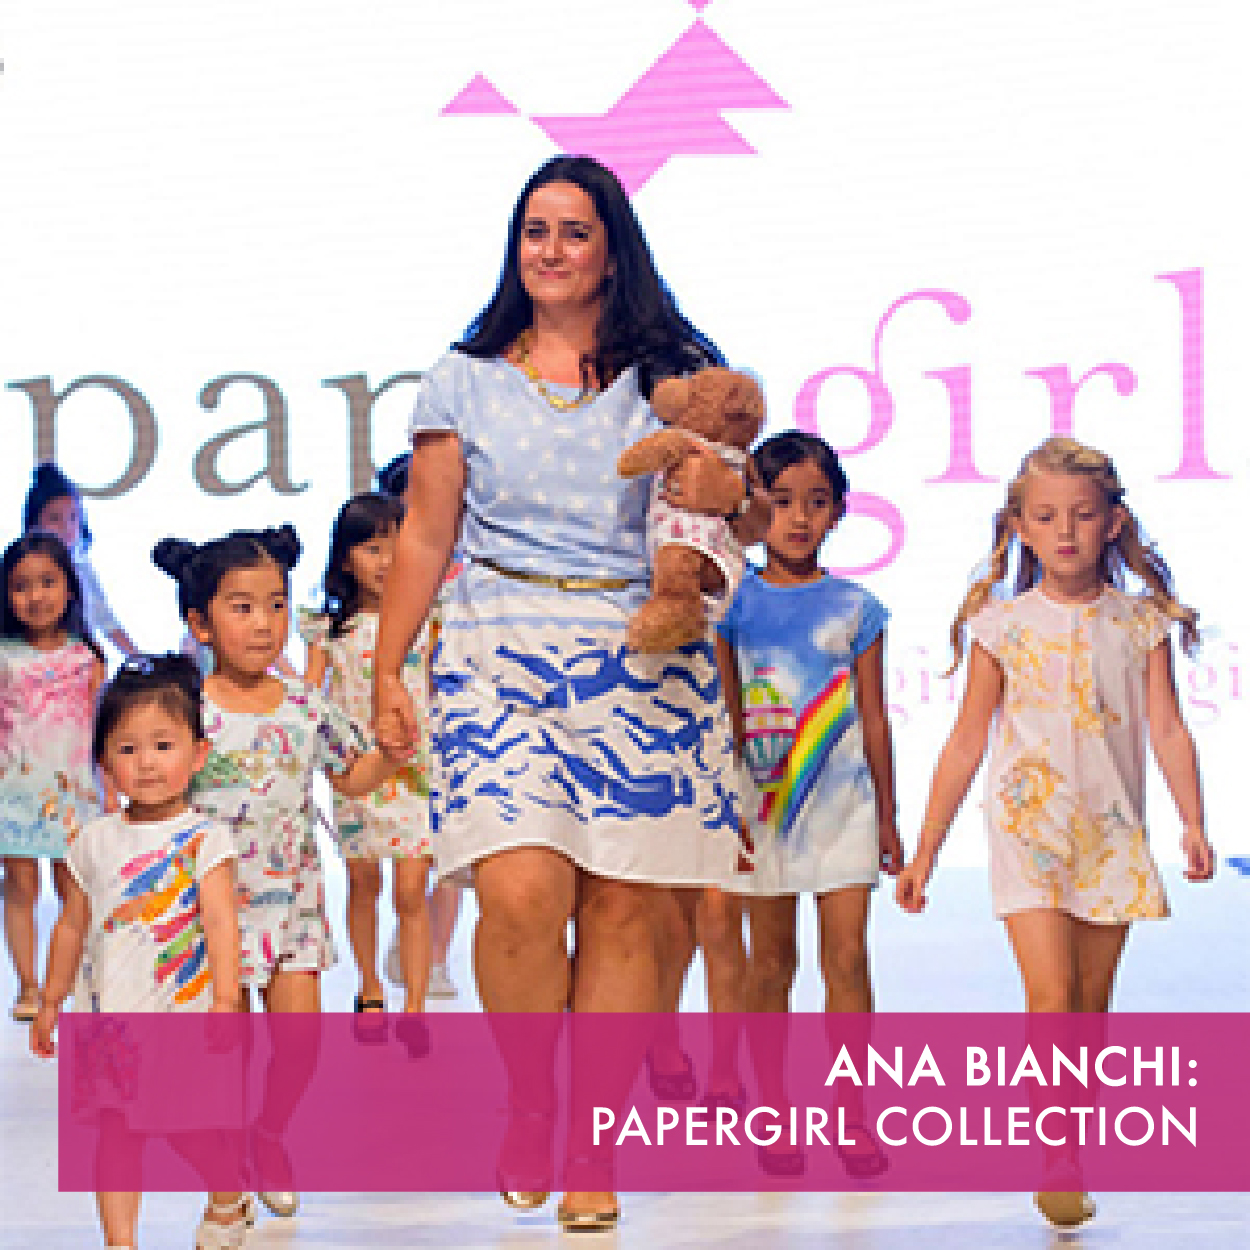 PaperGirl Collection, illustrated clothes, books, toys and decor for girls, celebrates imagination and creative freedom. Artwork is inspired by nature, art, cultures, and childhood fantasies.